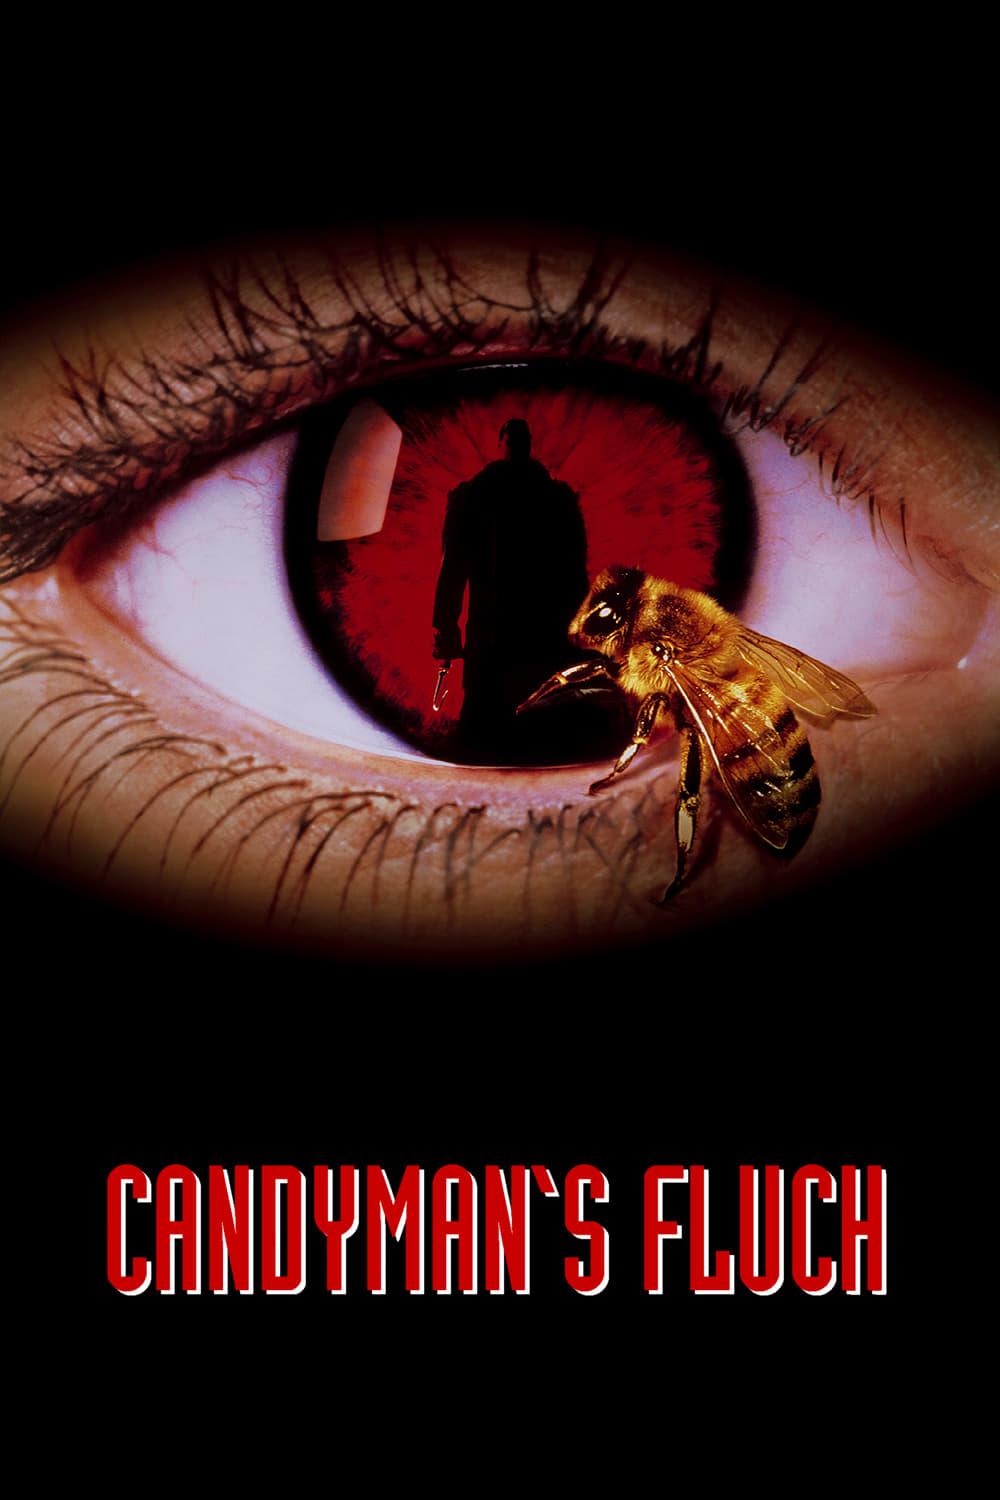 Candyman's Fluch poster